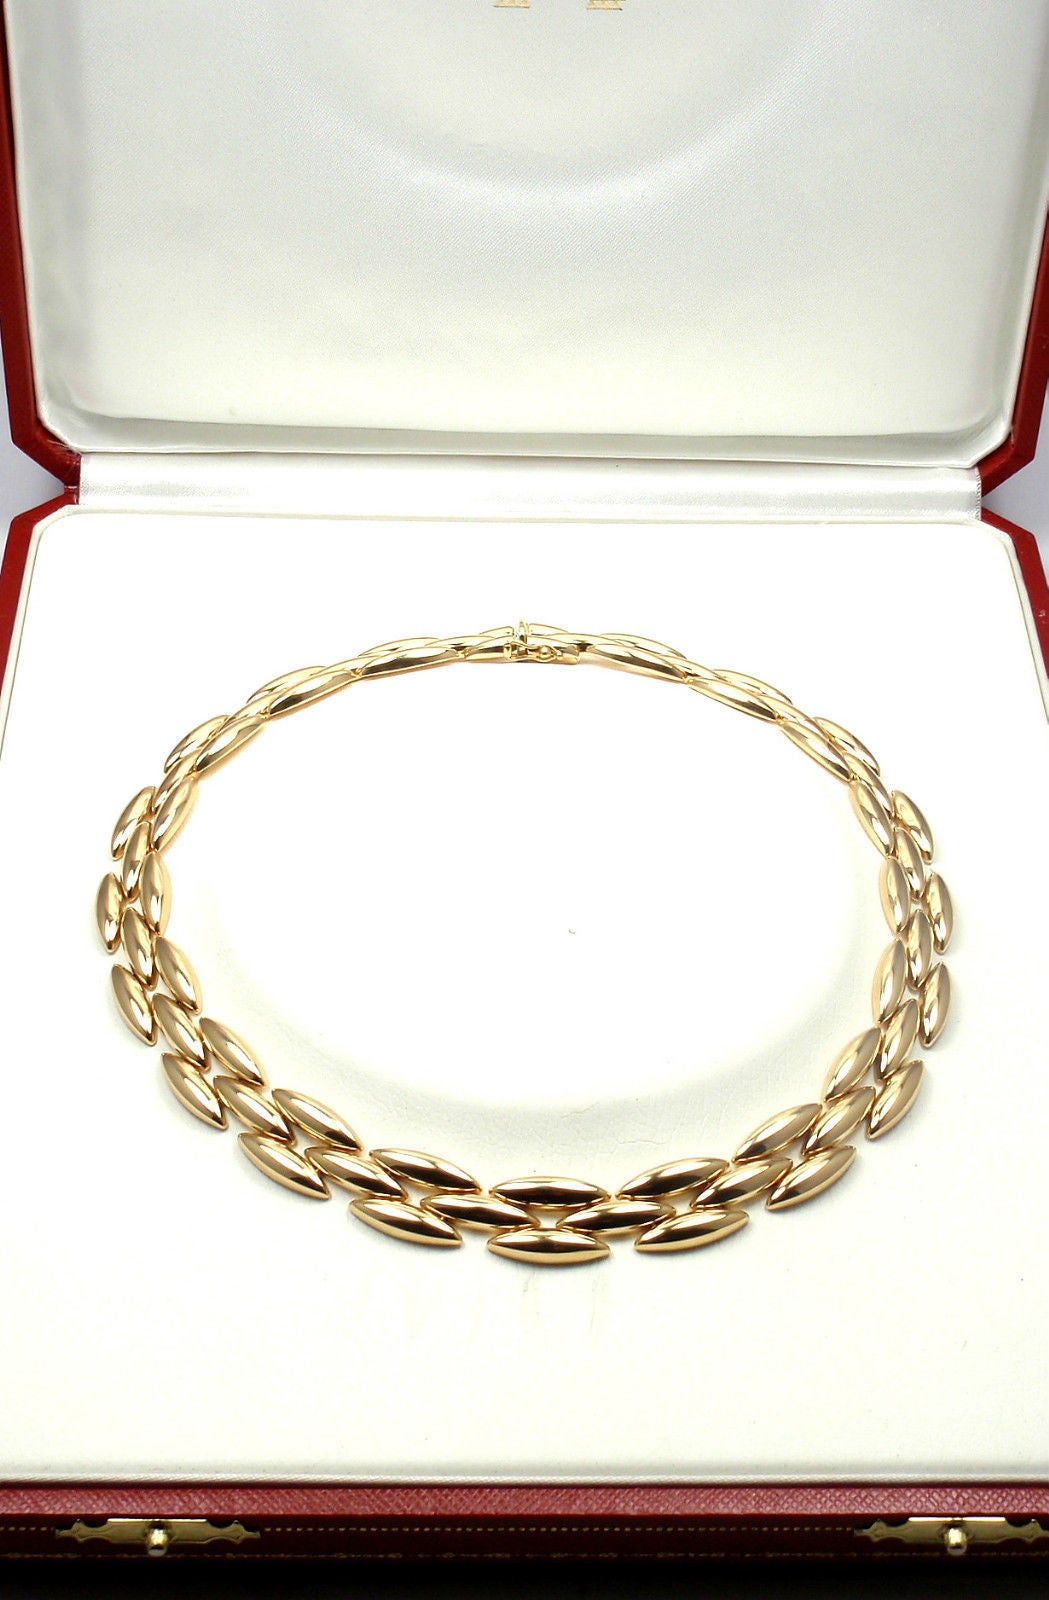 18k Yellow Gold Gentiane 3 Row Rice Link Necklace by Cartier. 
This beautiful necklace comes with an original Cartier box.

Details: 
Length: 15